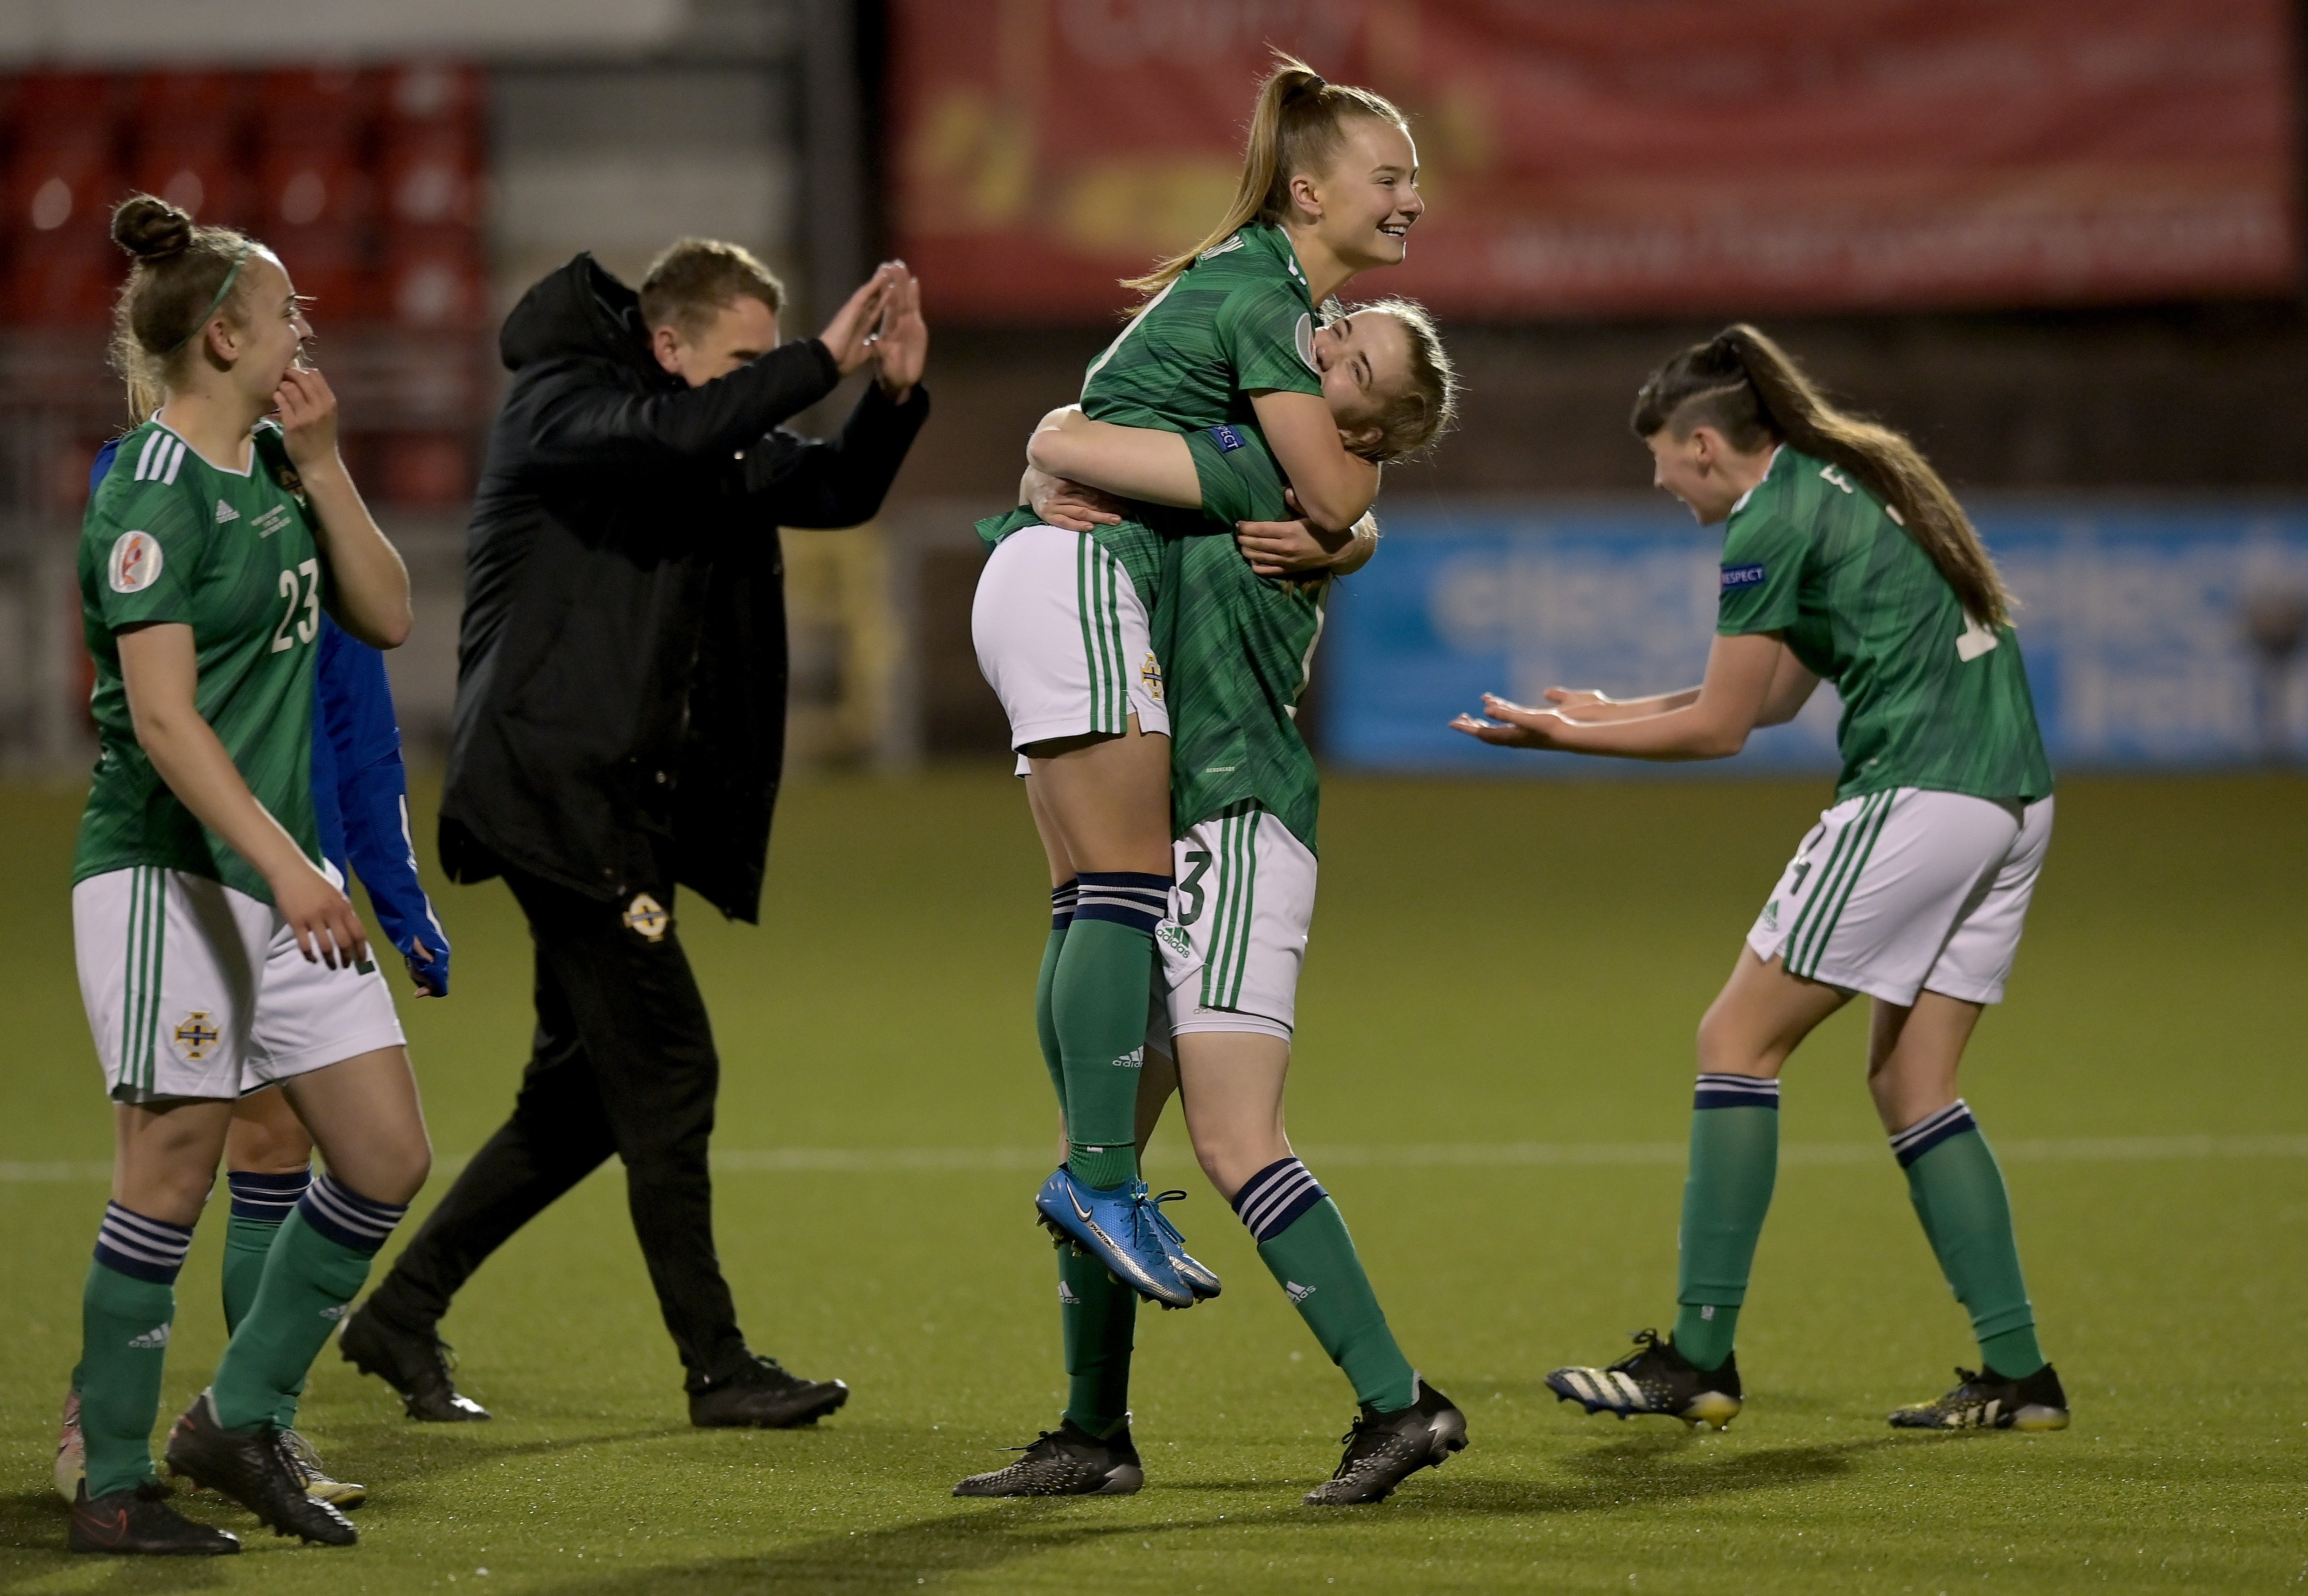 Emily Wilson and Emma McMaster of Northern Ireland celebrate victory over Ukraine in April 2021